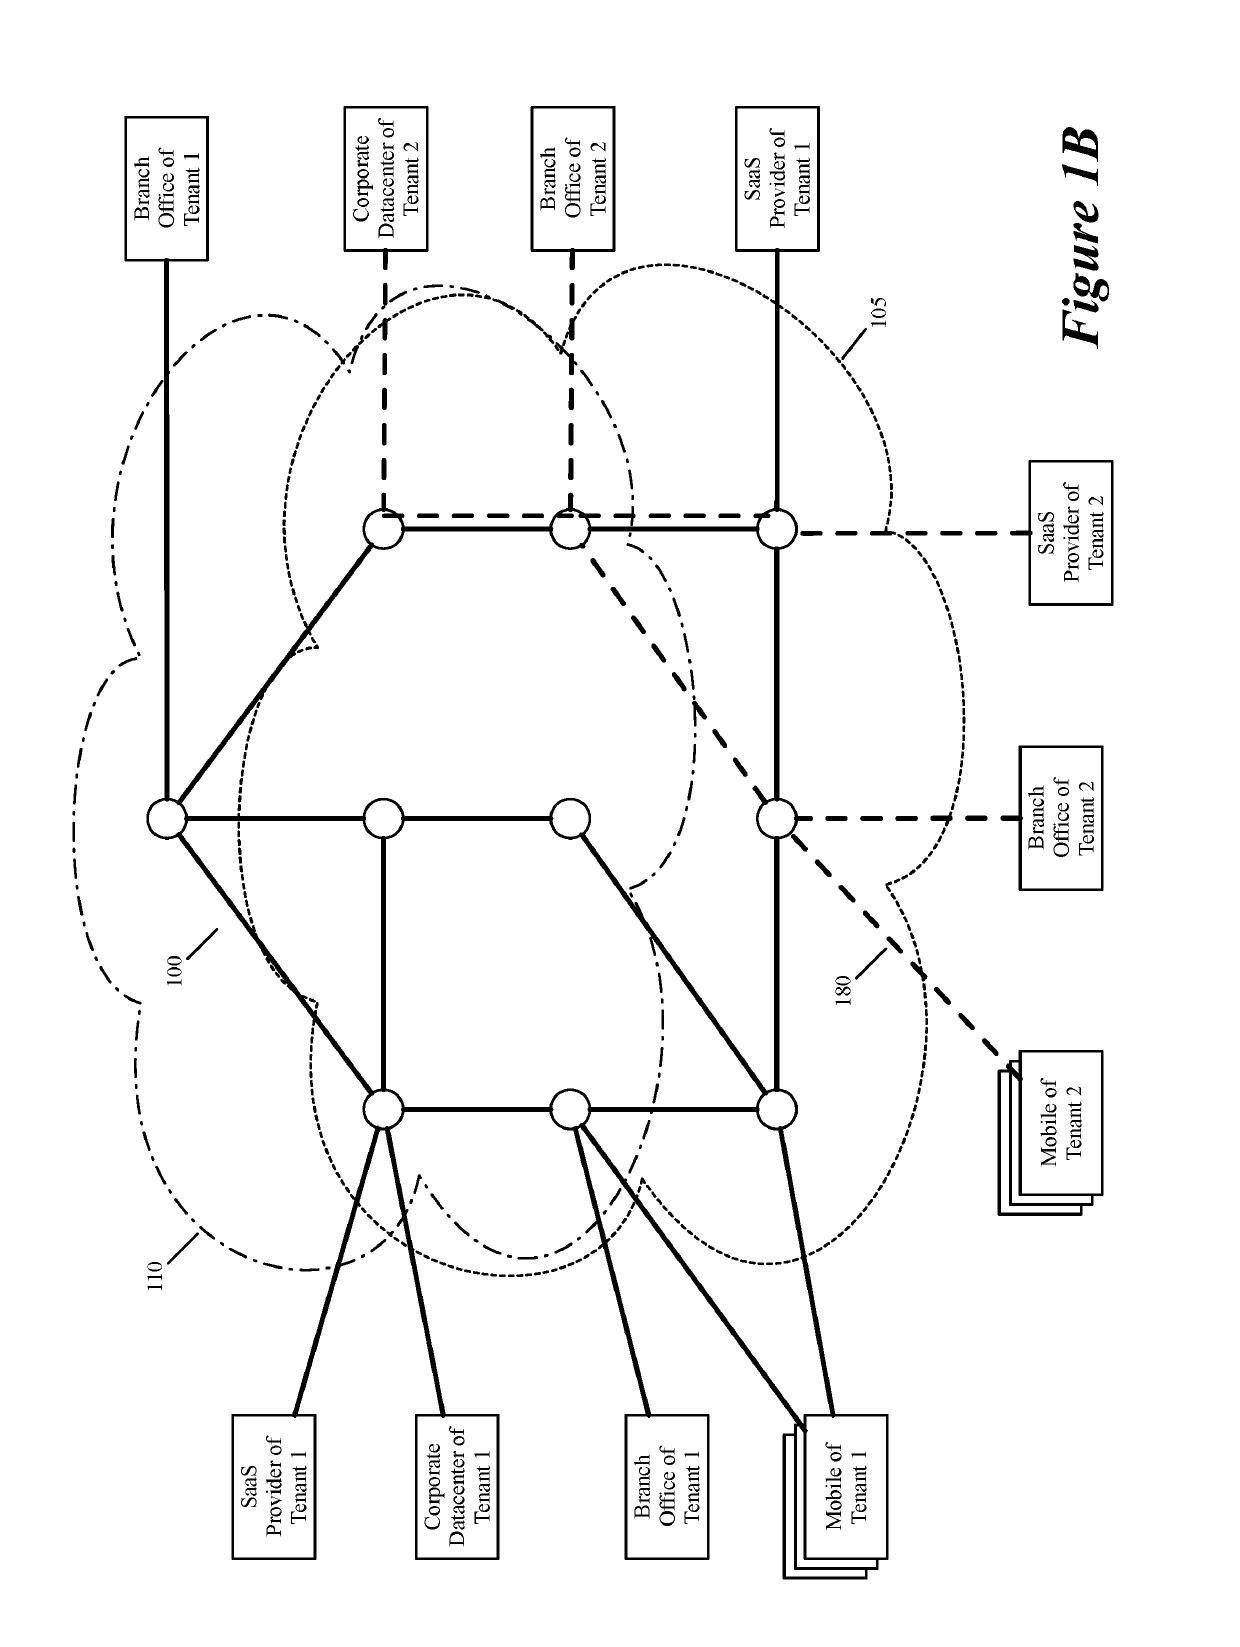 Defining and distributing routes for a virtual network